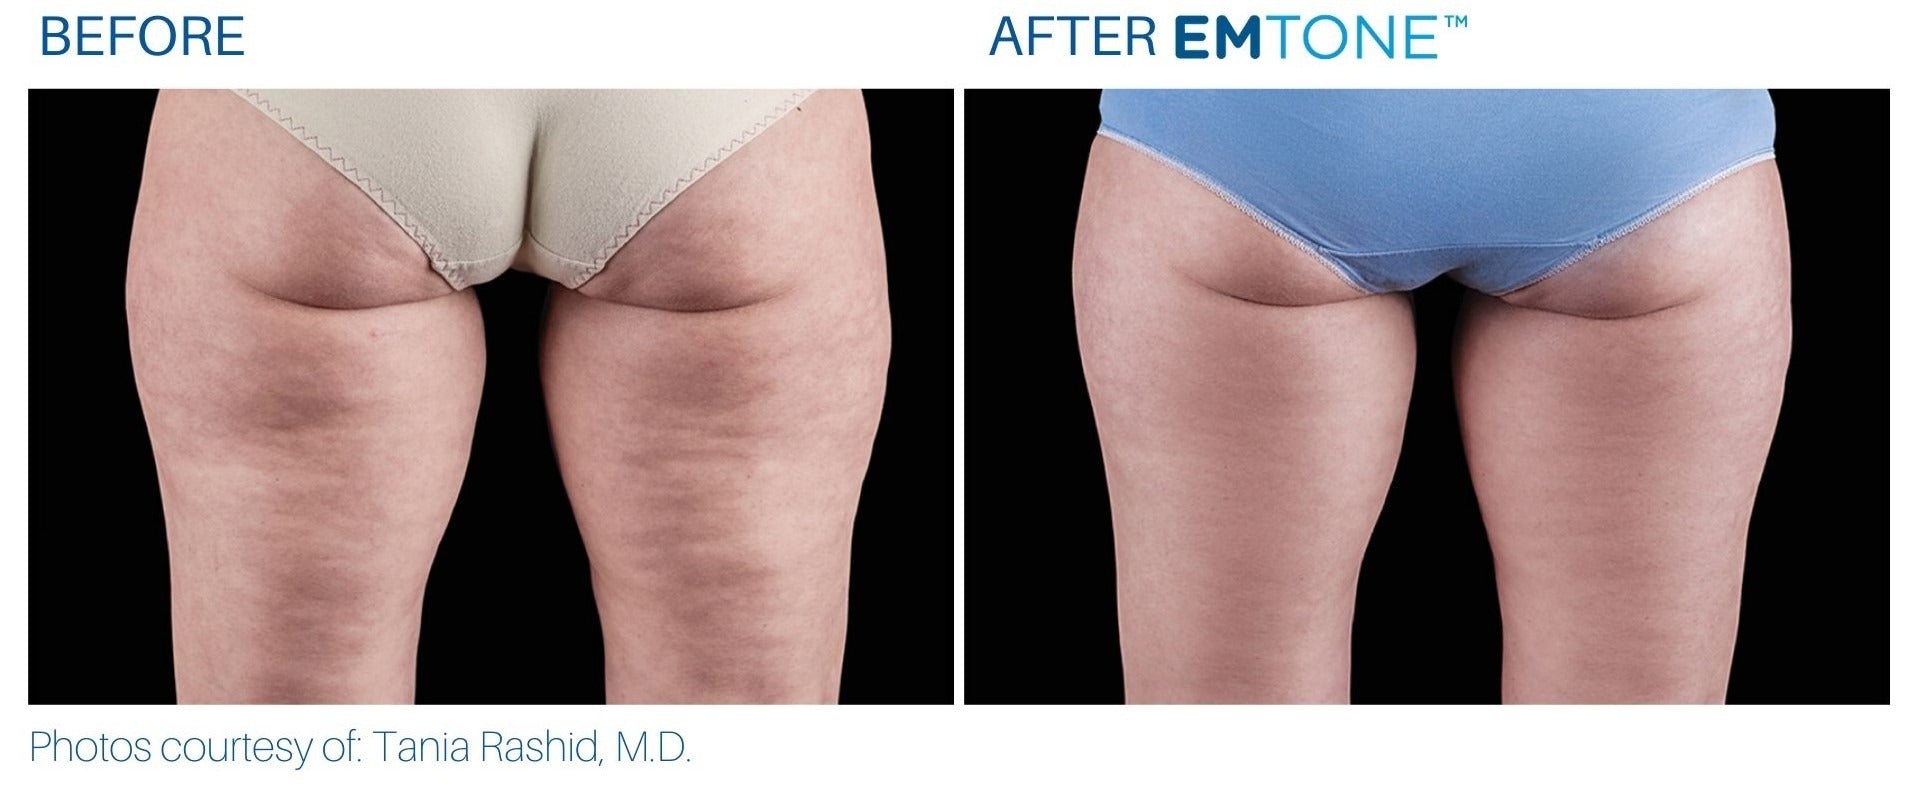 EmTone Skin Tightening & Cellulite Treatment Course of 6 for one or two areas (as low as €225 per session)